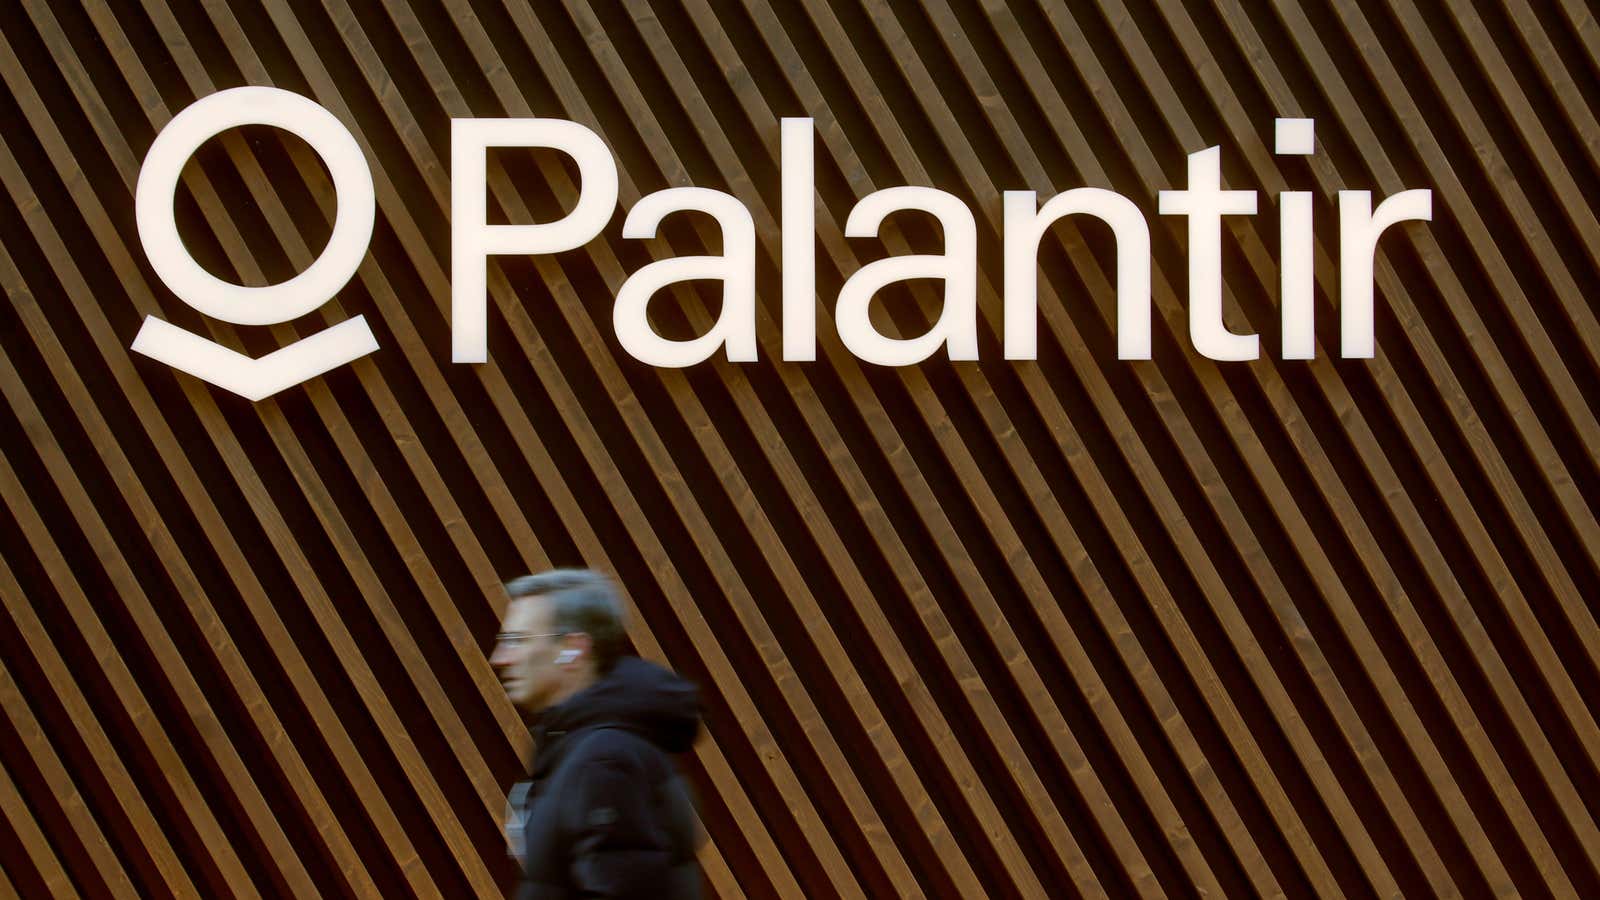 Palantir’s executives want to do things differently.